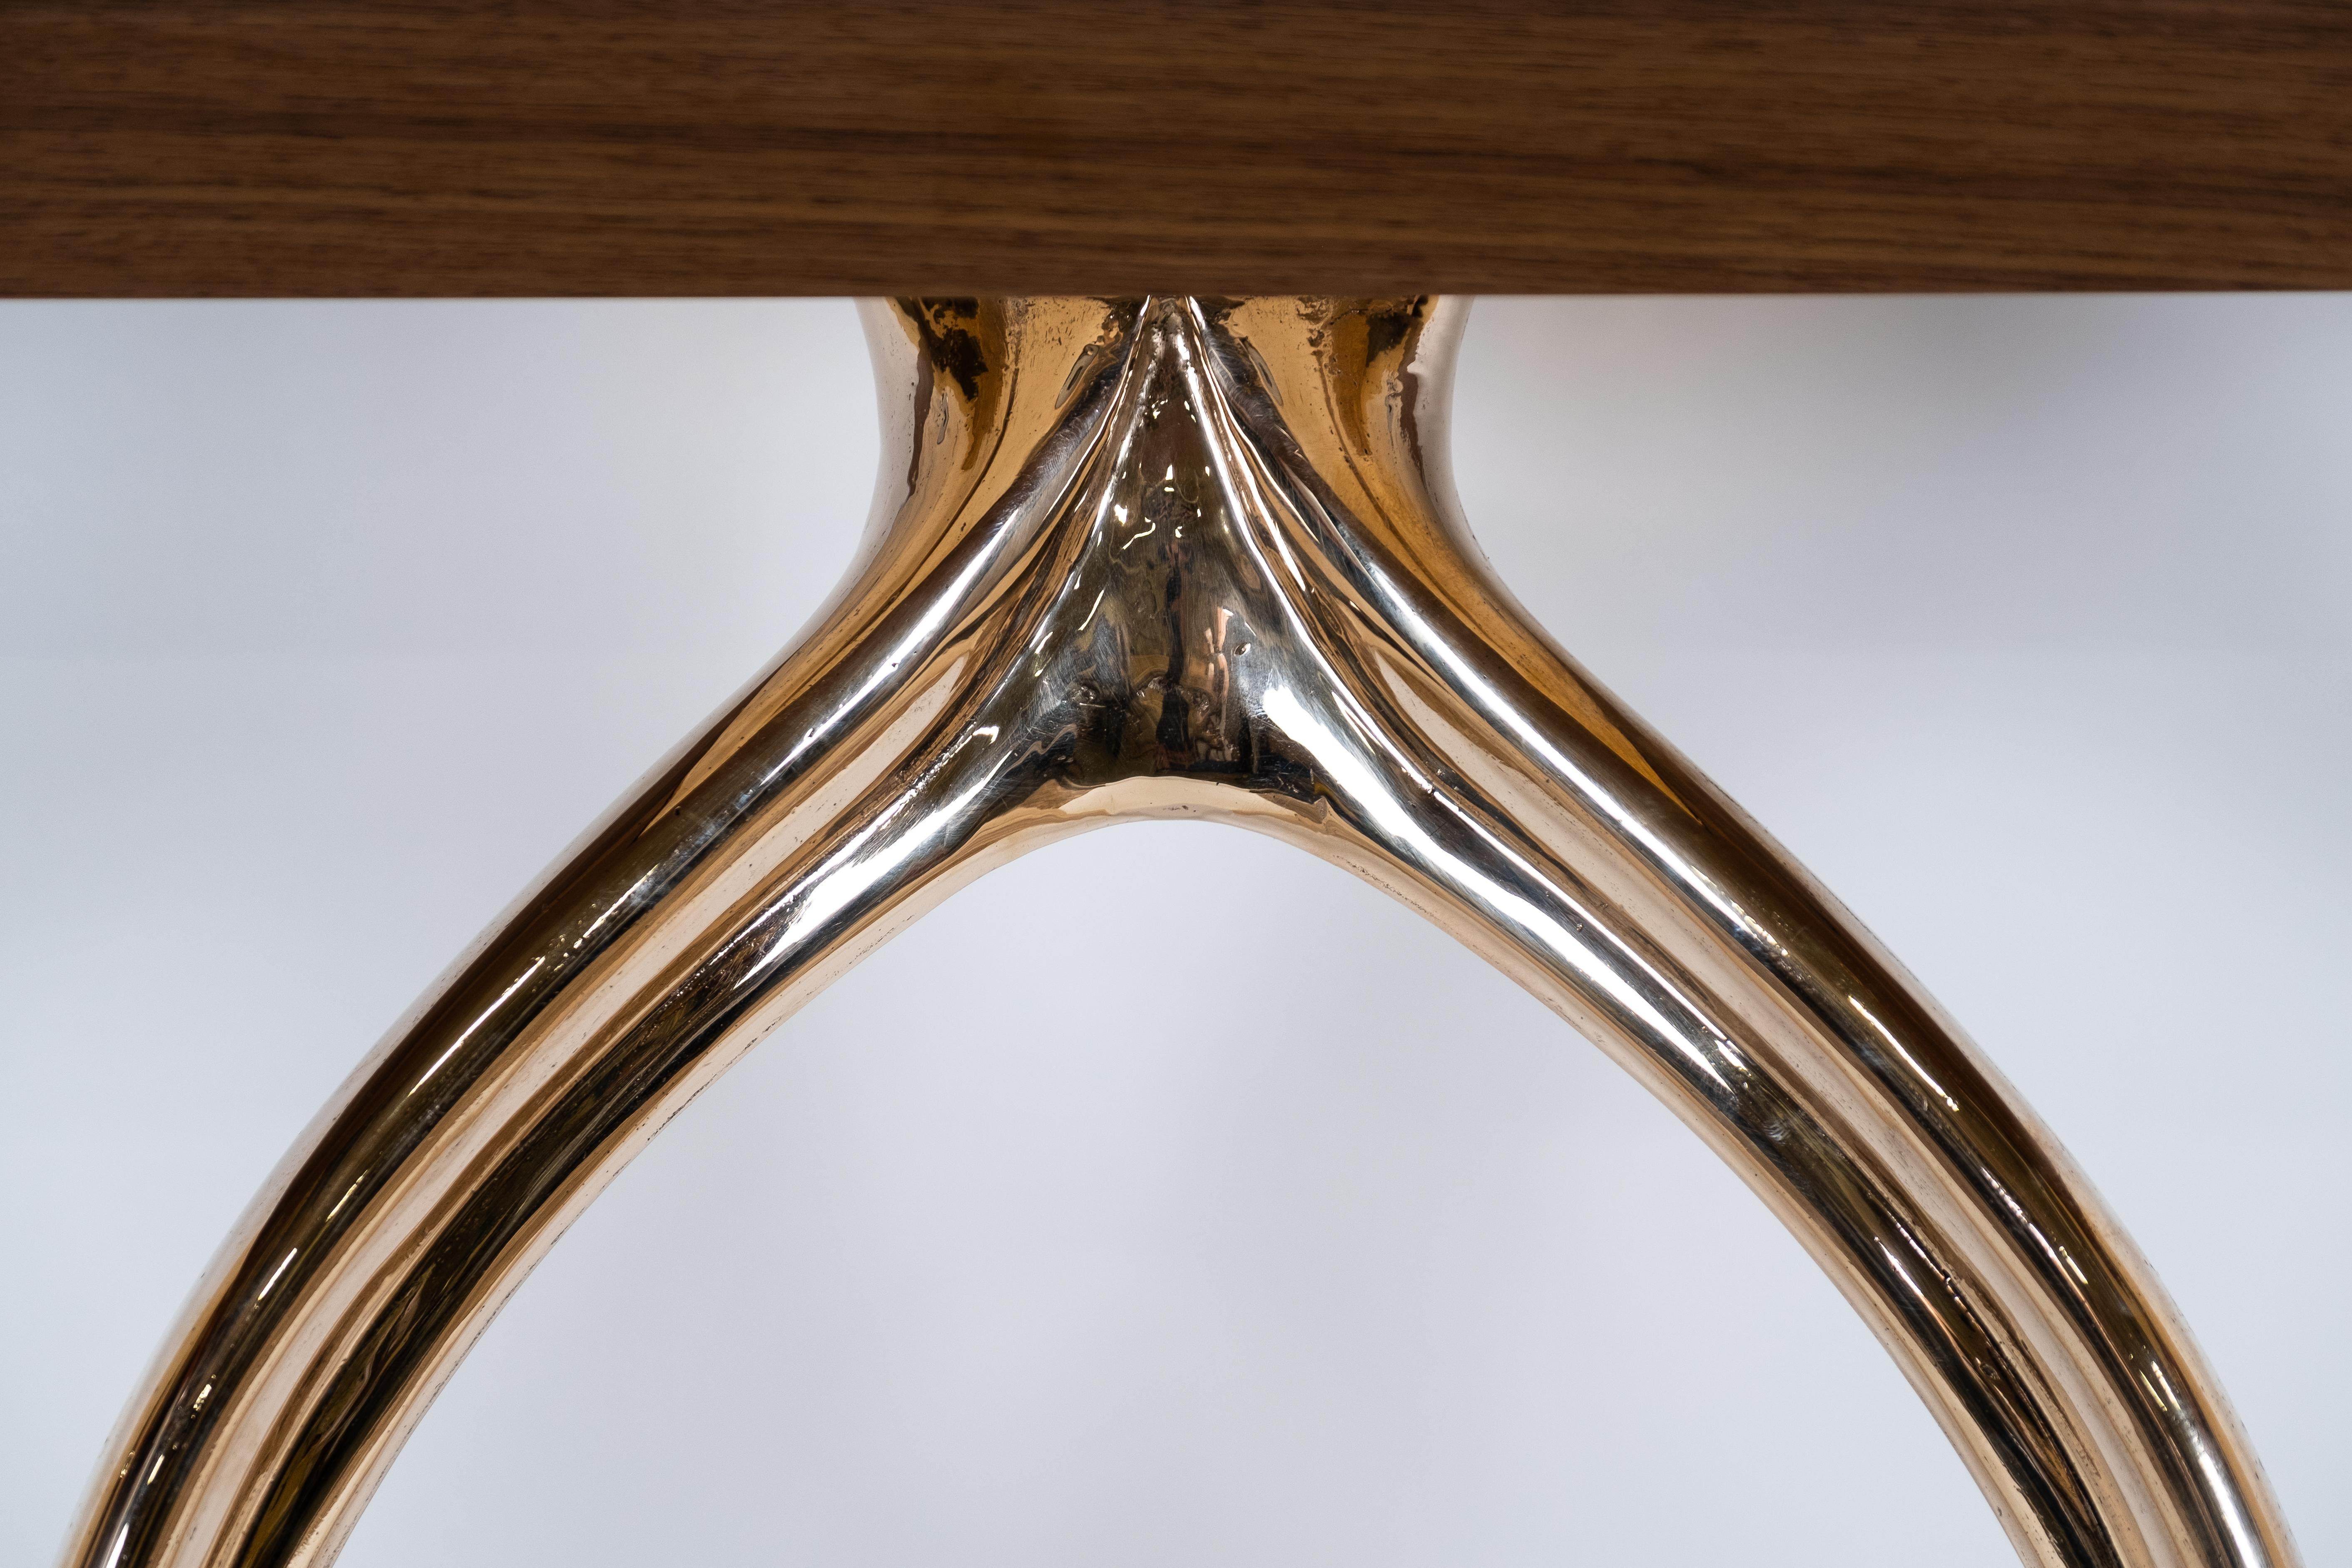 A single cast-metal Wishbone leg is paired with a demilune or rectangular tabletop of domestic hardwood. The sand-casting process produces faintly perceptible irregularities that enhance the leg’s tactile appeal. The wood top has STACKLAB’s